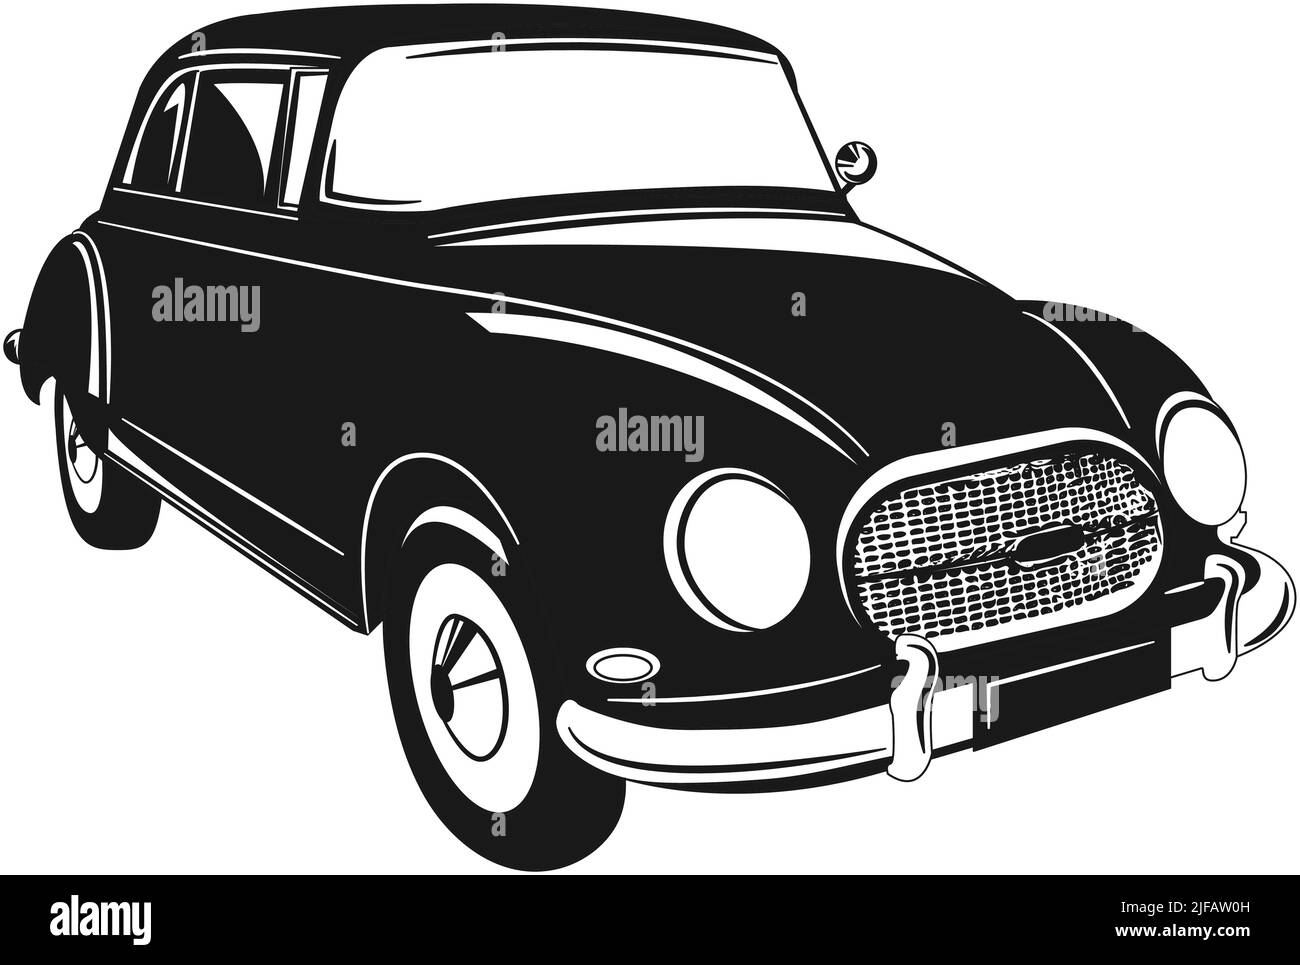 50s vintage car isolated on white Vector illustration Stock Vector